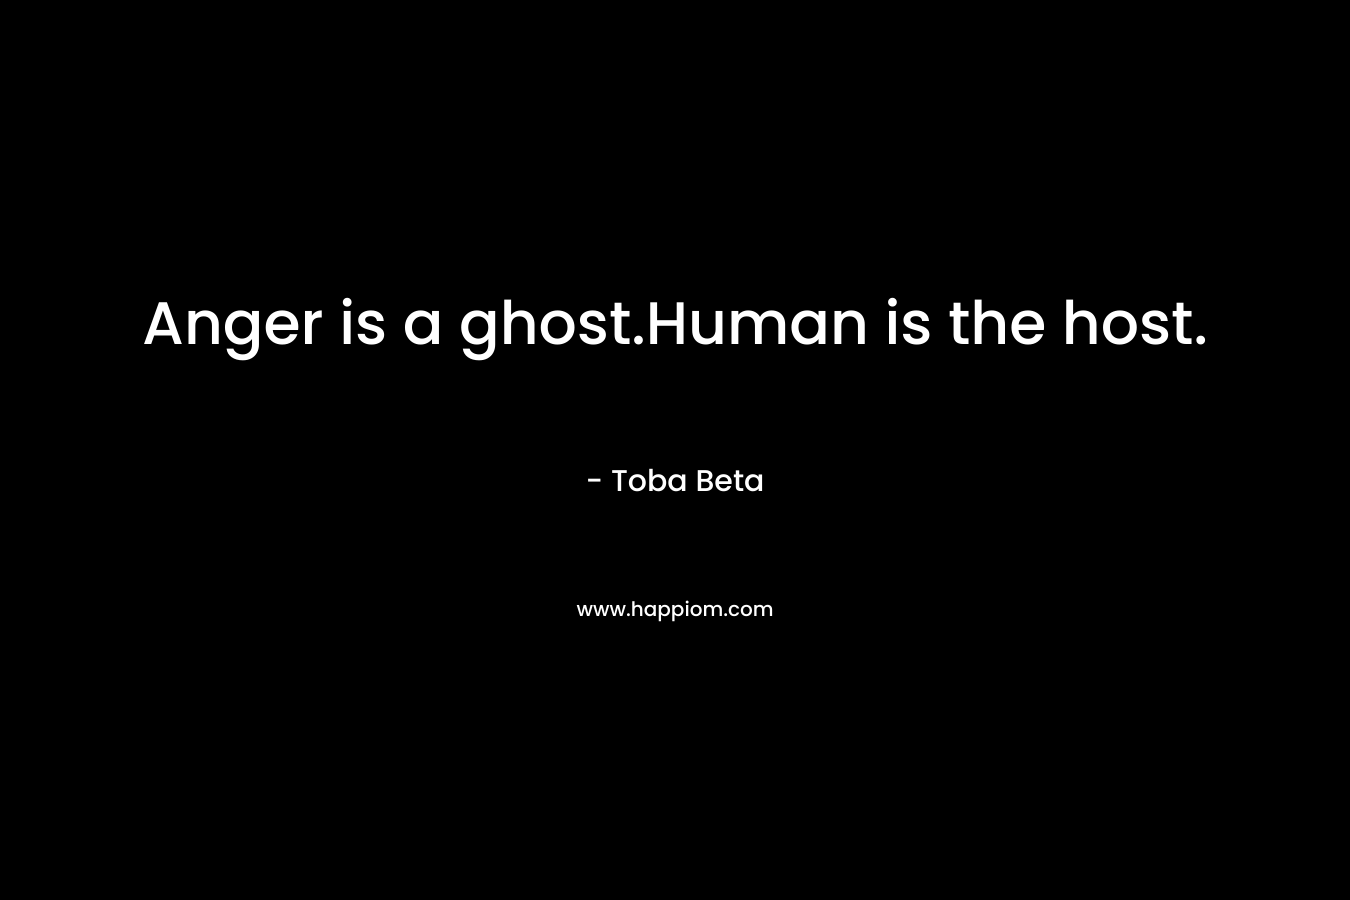 Anger is a ghost.Human is the host.